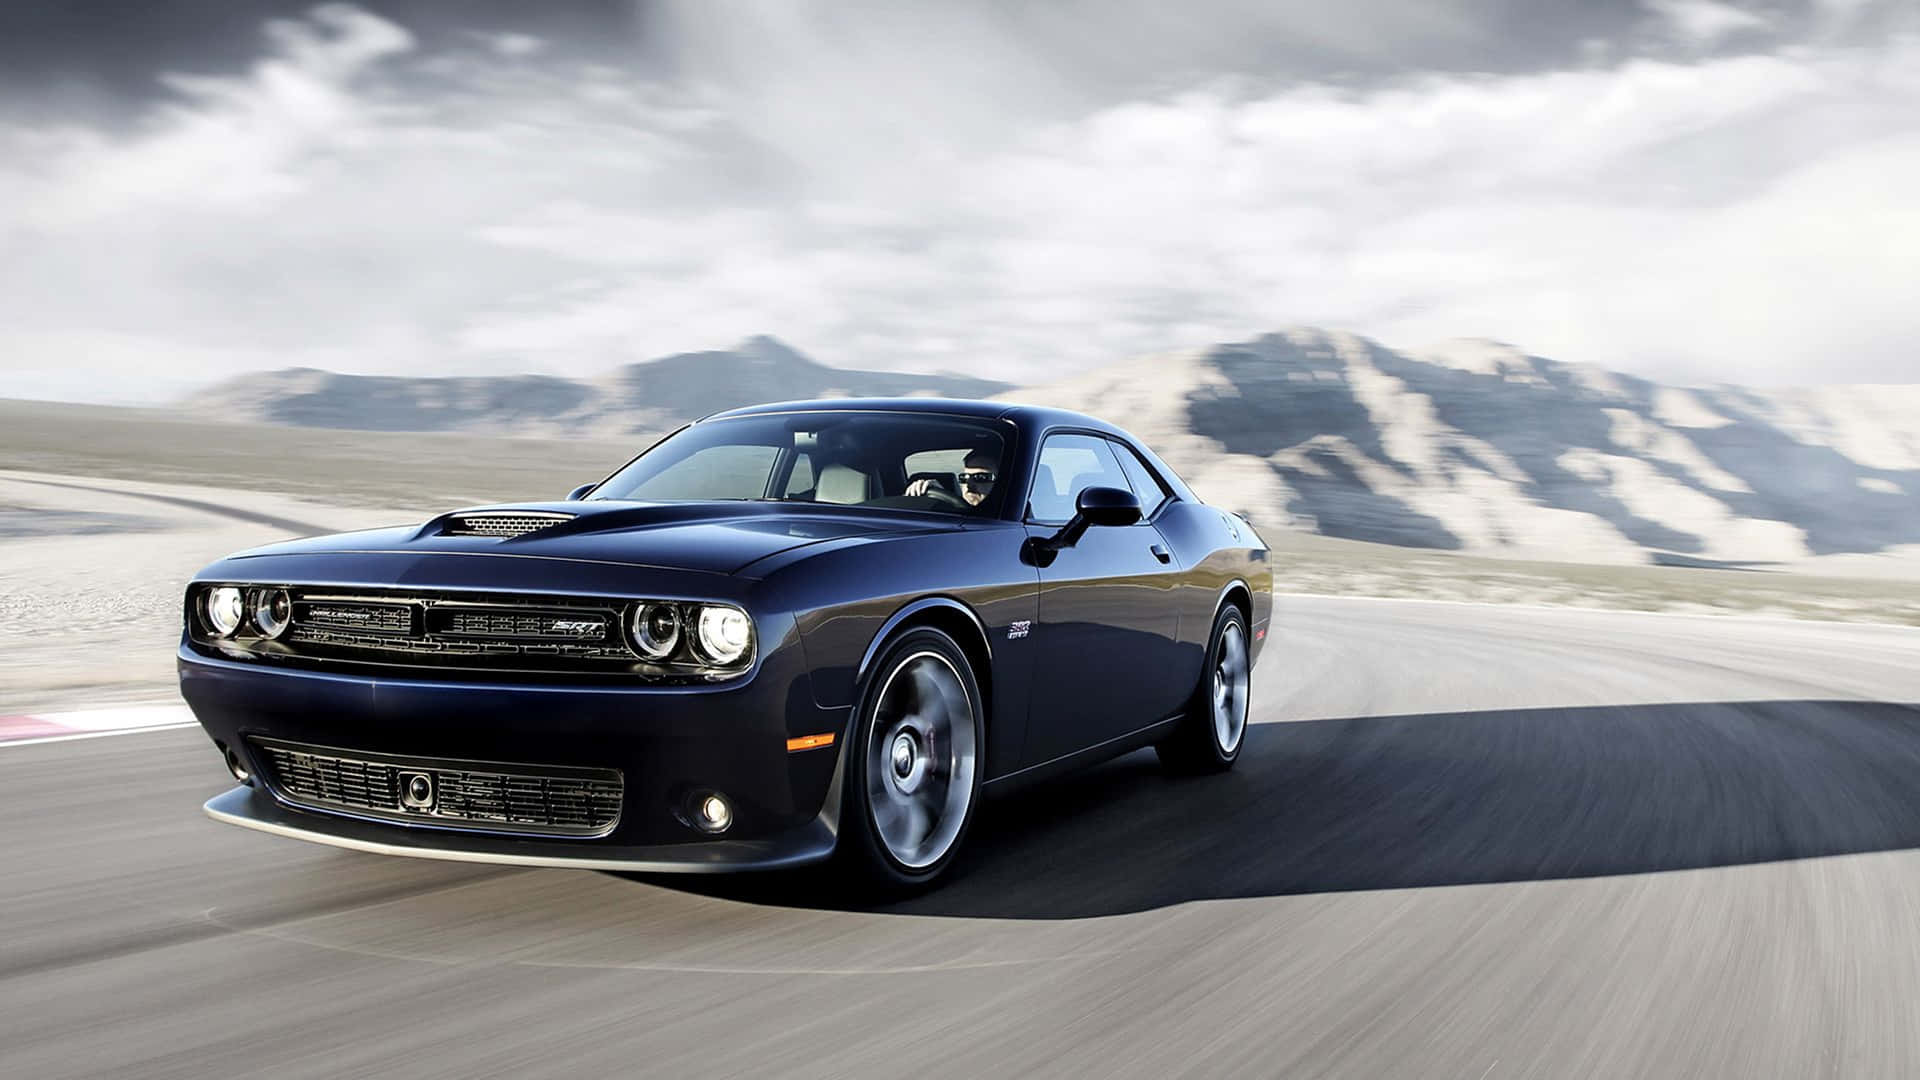 Iconic, Powerful, and Reliable - The Dodge Hellcat Wallpaper